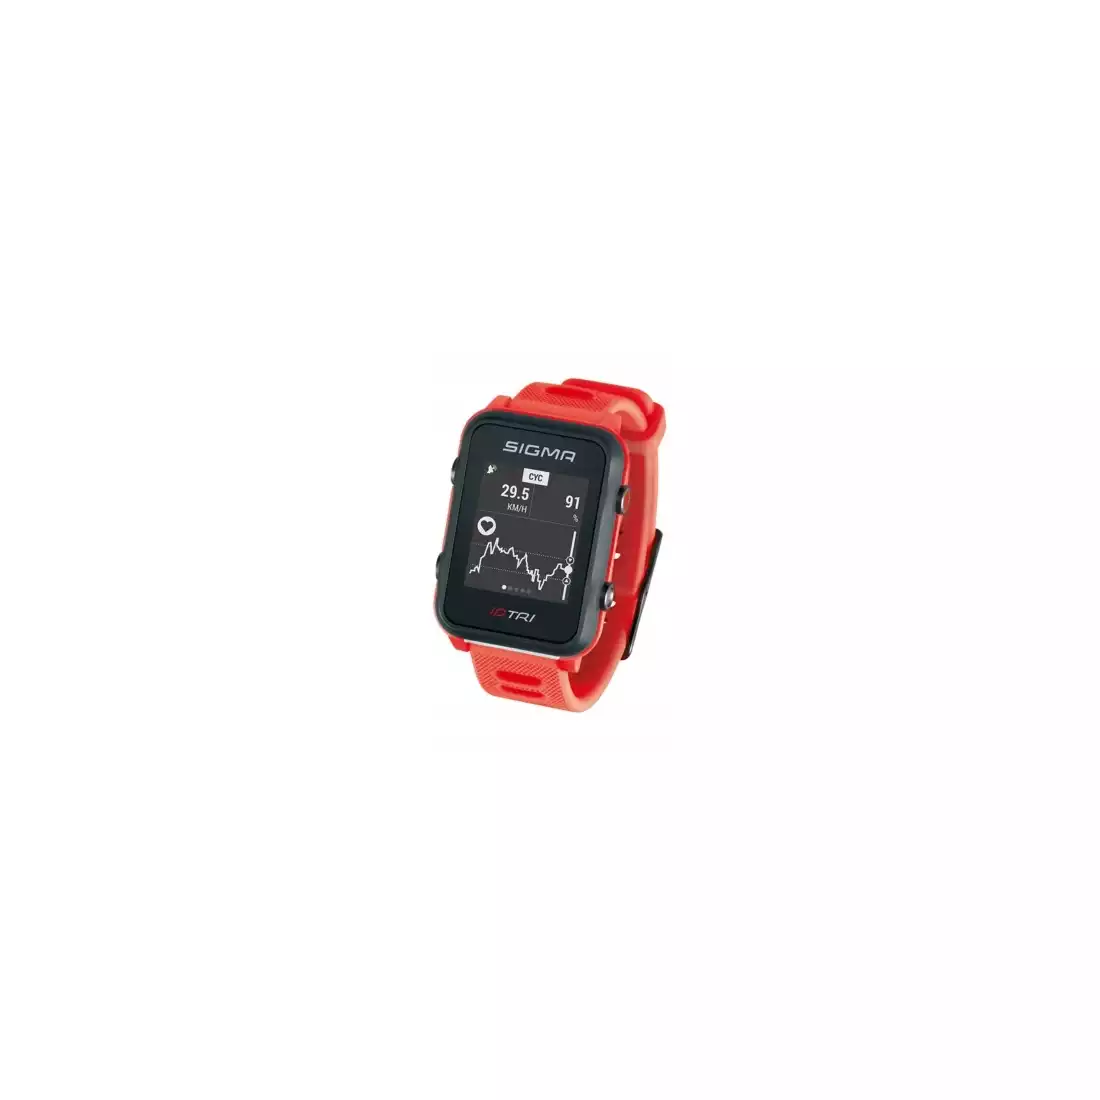 SIGMA ID.TRI SET heart rate monitor with band, red